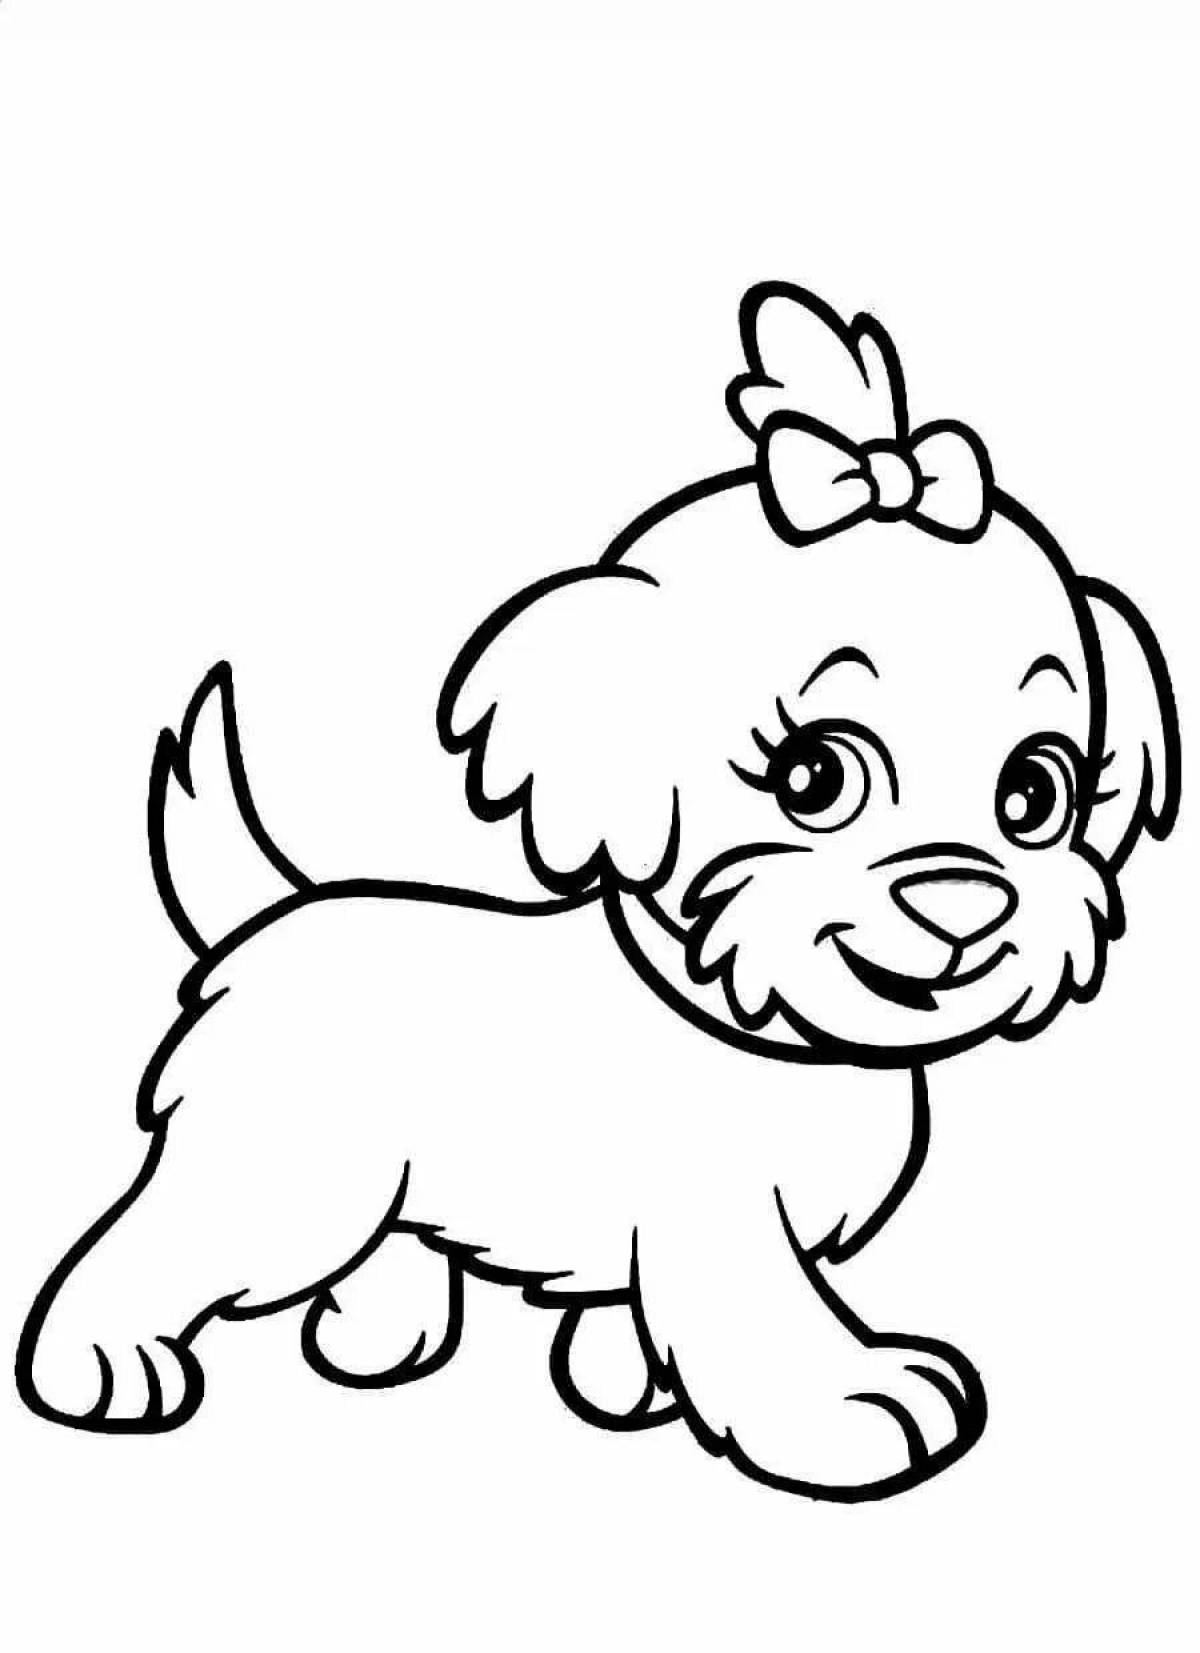 Entertaining dog coloring book for children 6-7 years old